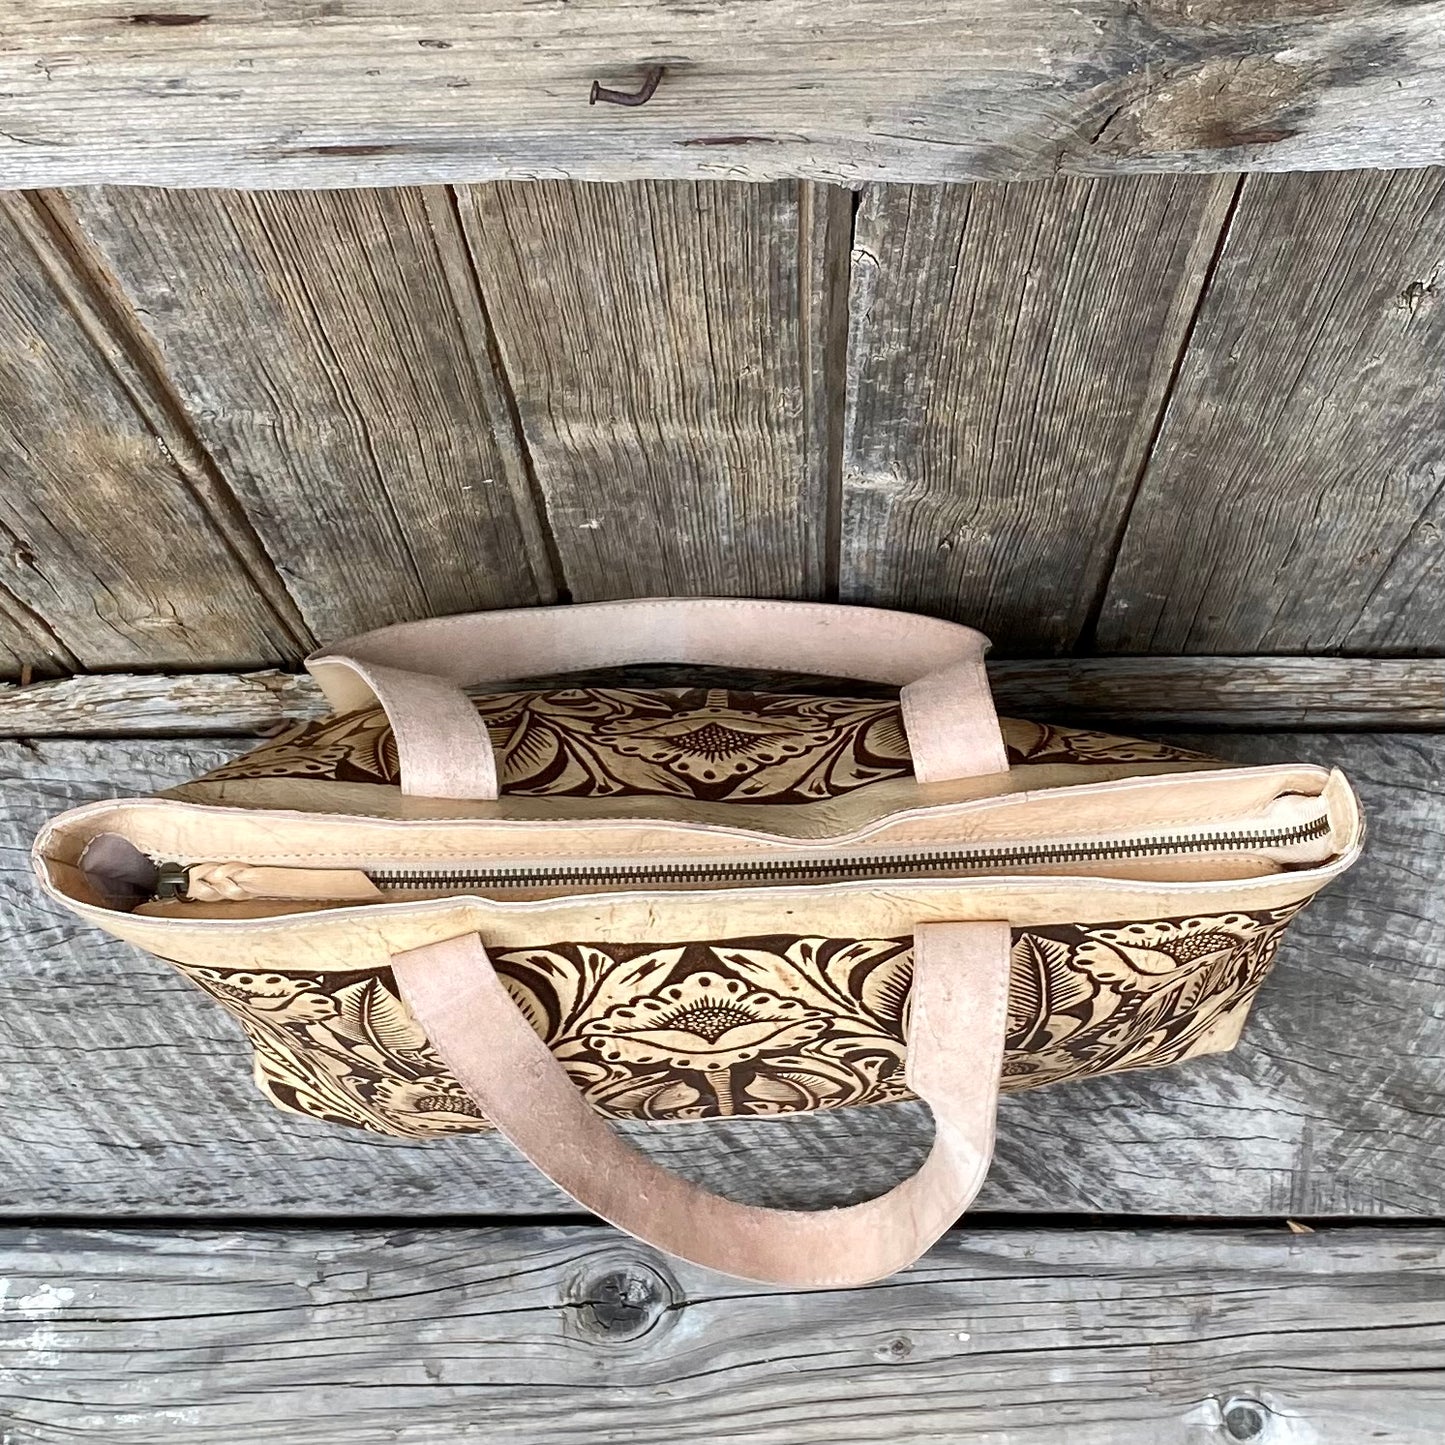 Large Carved Leather tote